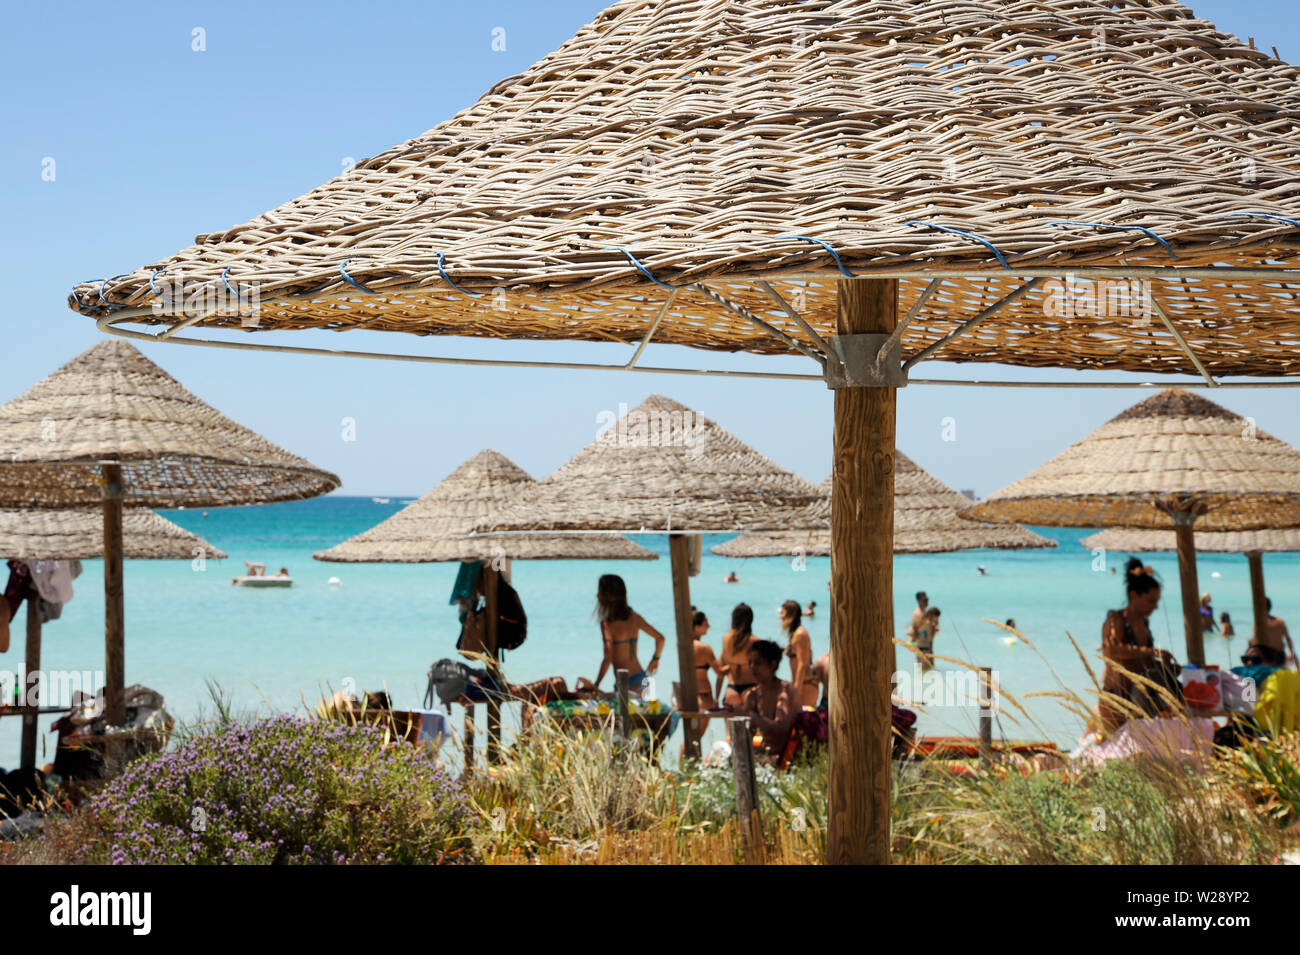 Beautiful beach resort with straw umbrellas on a blue sky and white clouds. On the background some people having fun on the beach. Clear sea. Beach li Stock Photo